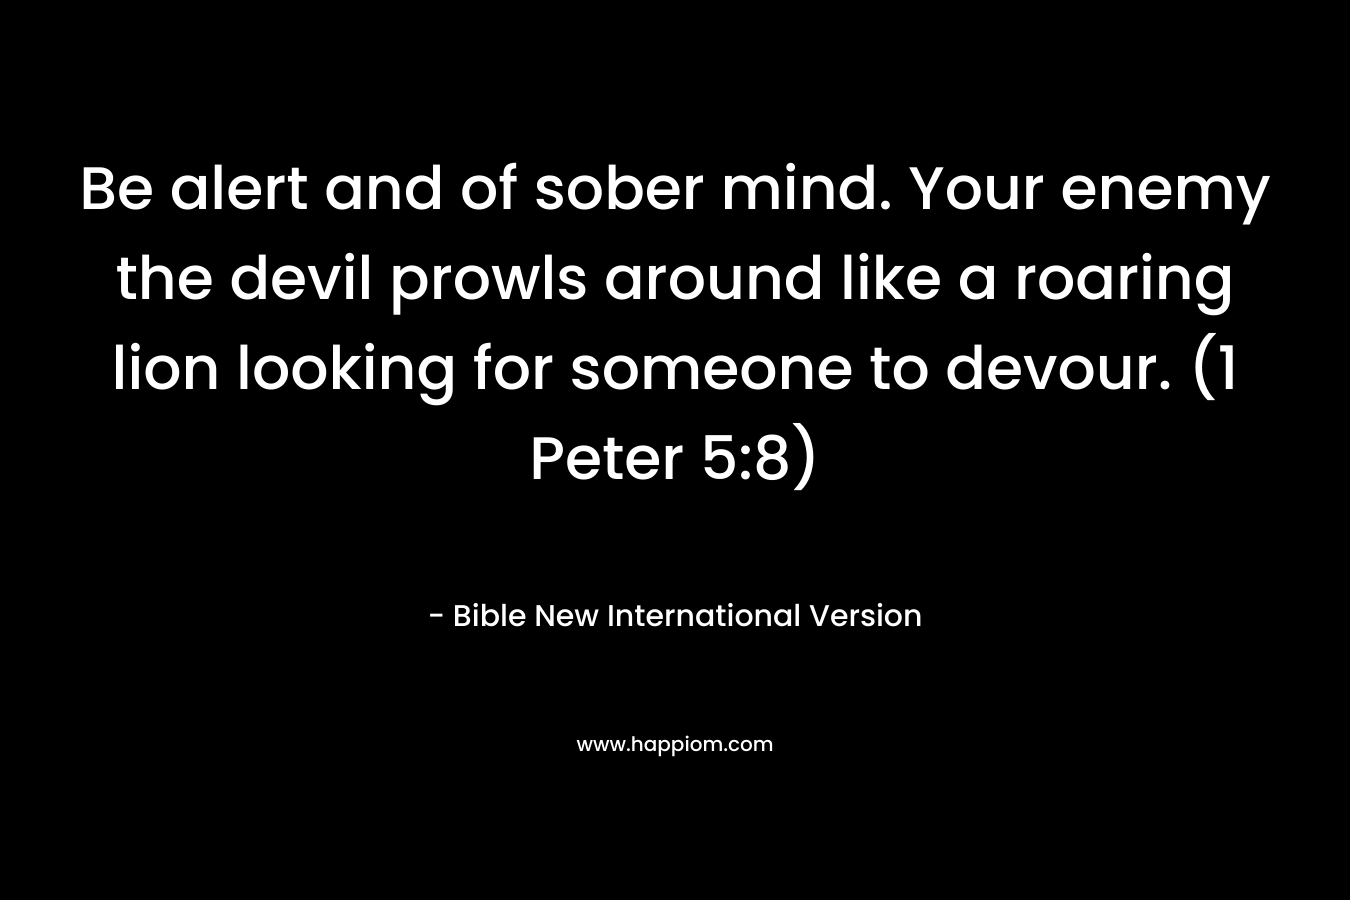 Be alert and of sober mind. Your enemy the devil prowls around like a roaring lion looking for someone to devour. (1 Peter 5:8)